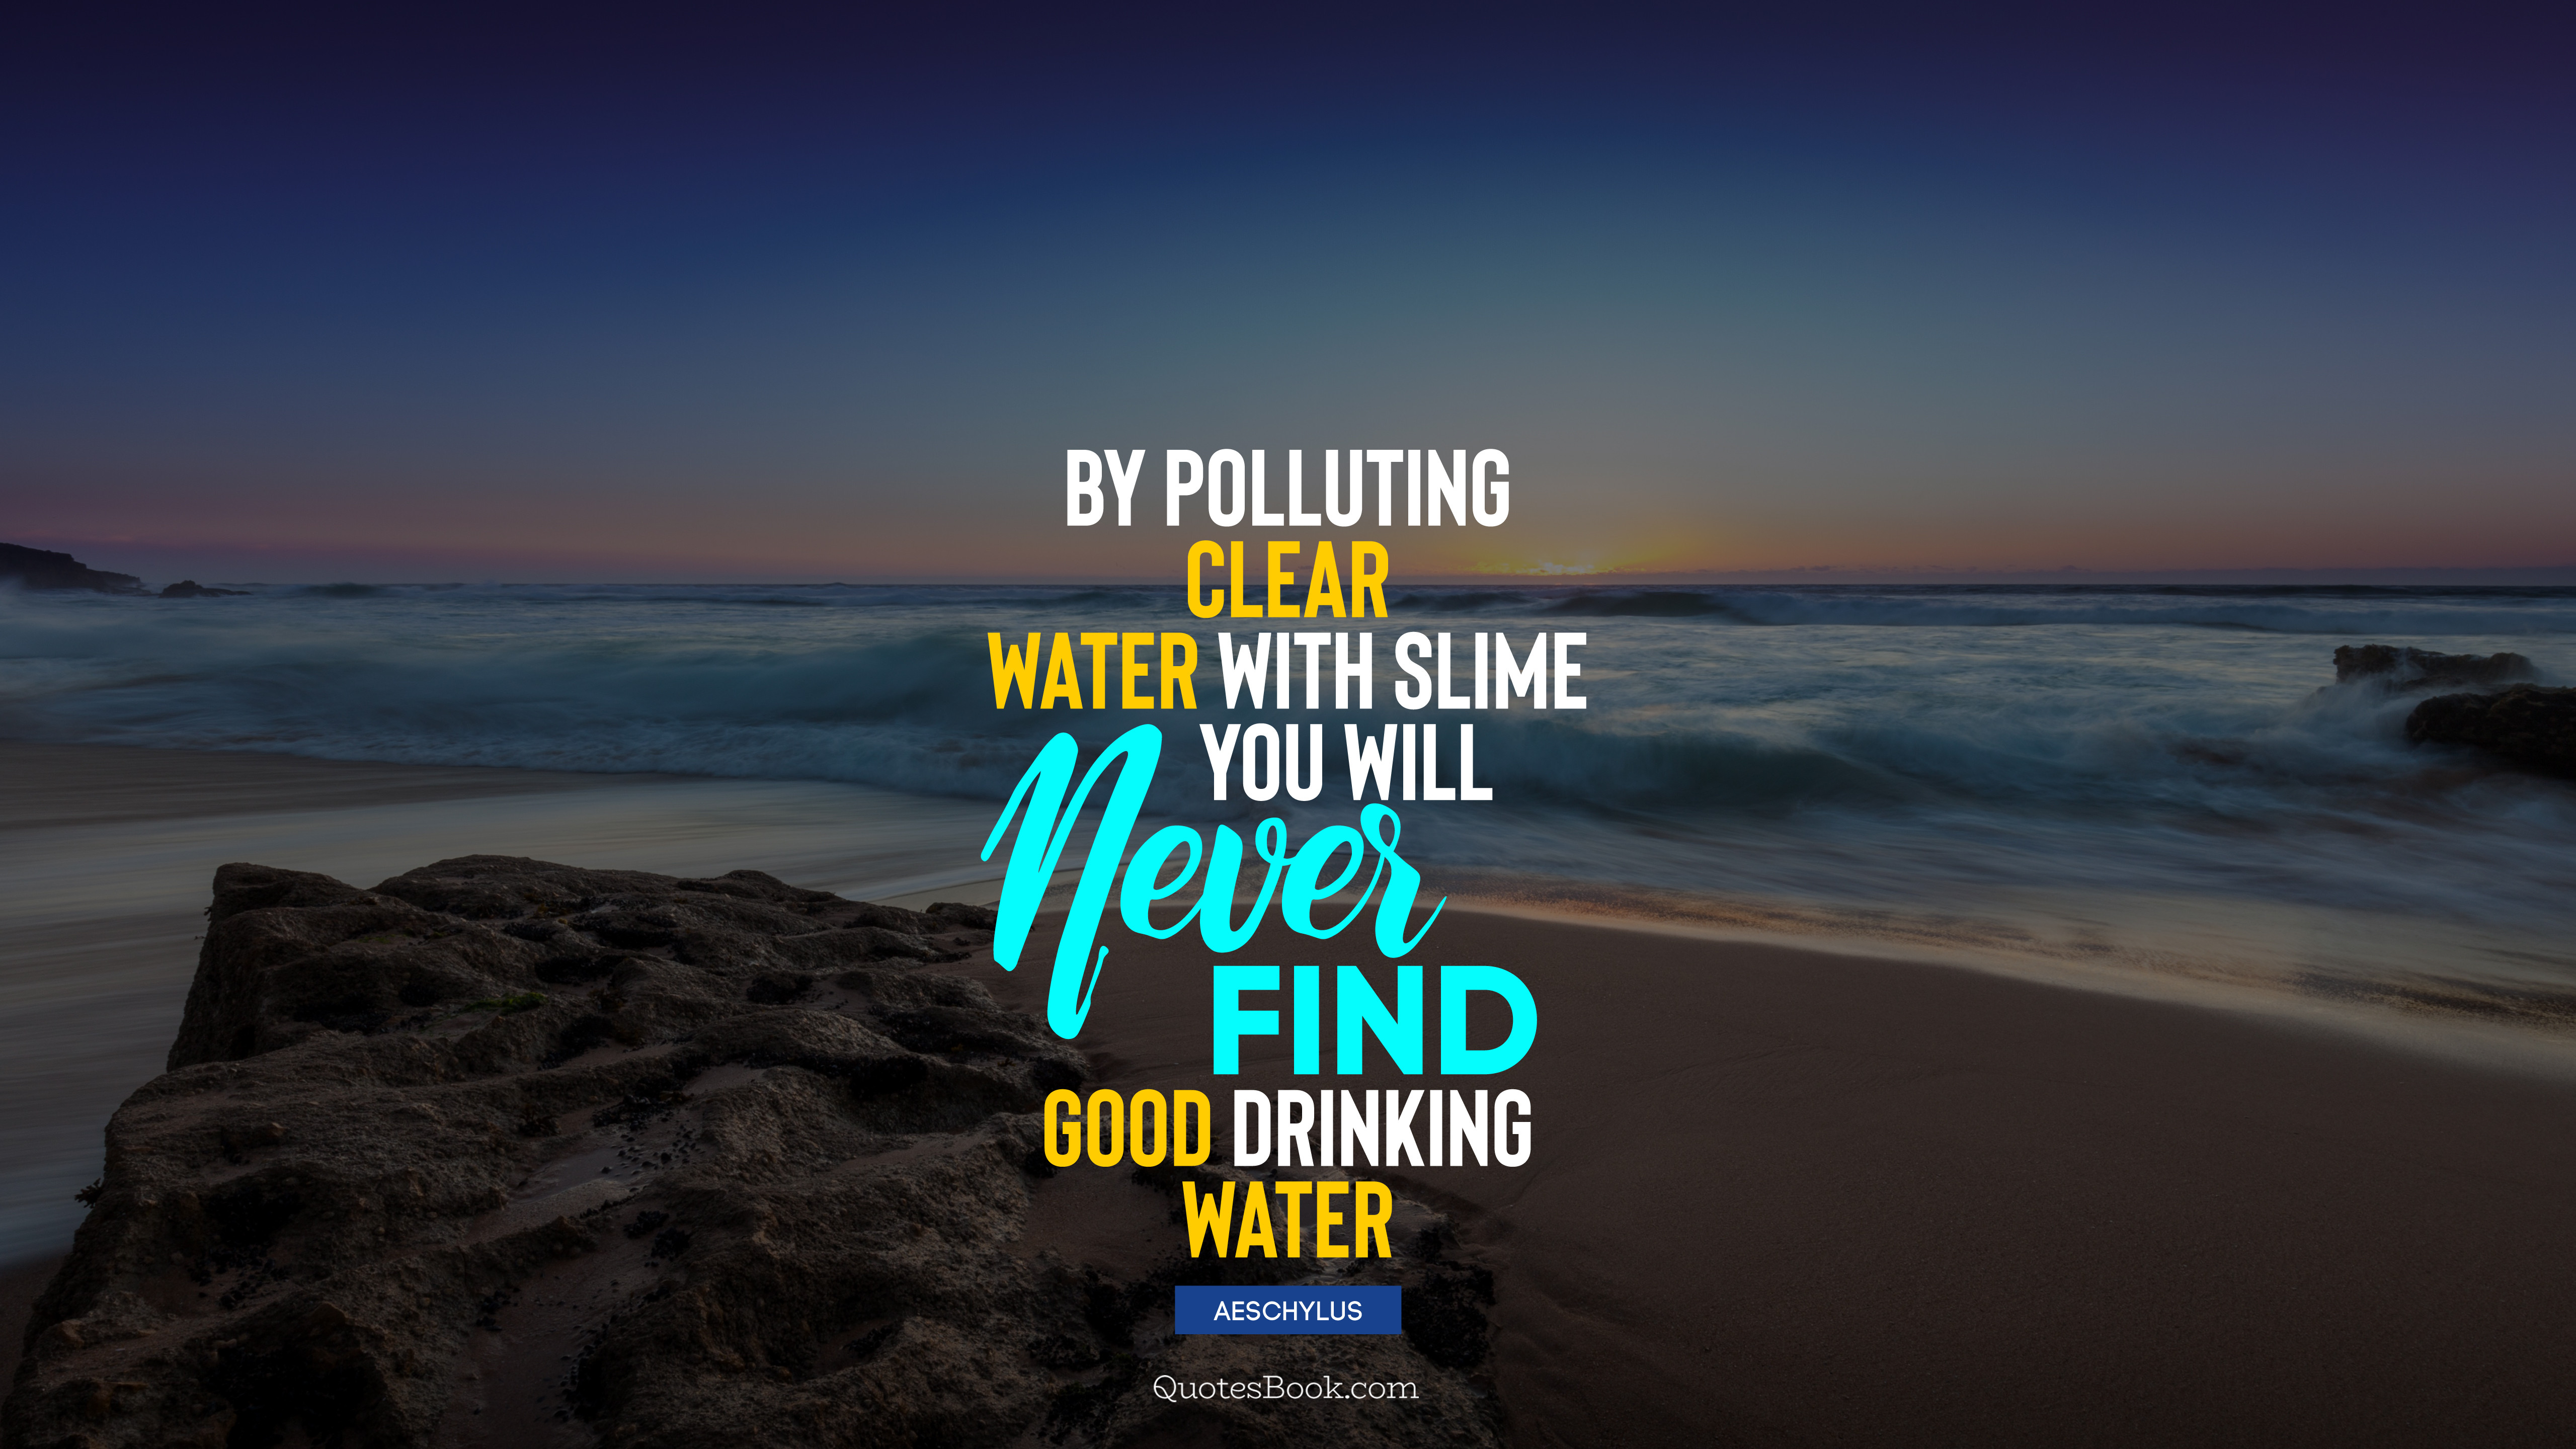 By polluting clear water with slime you will never find good drinking ...